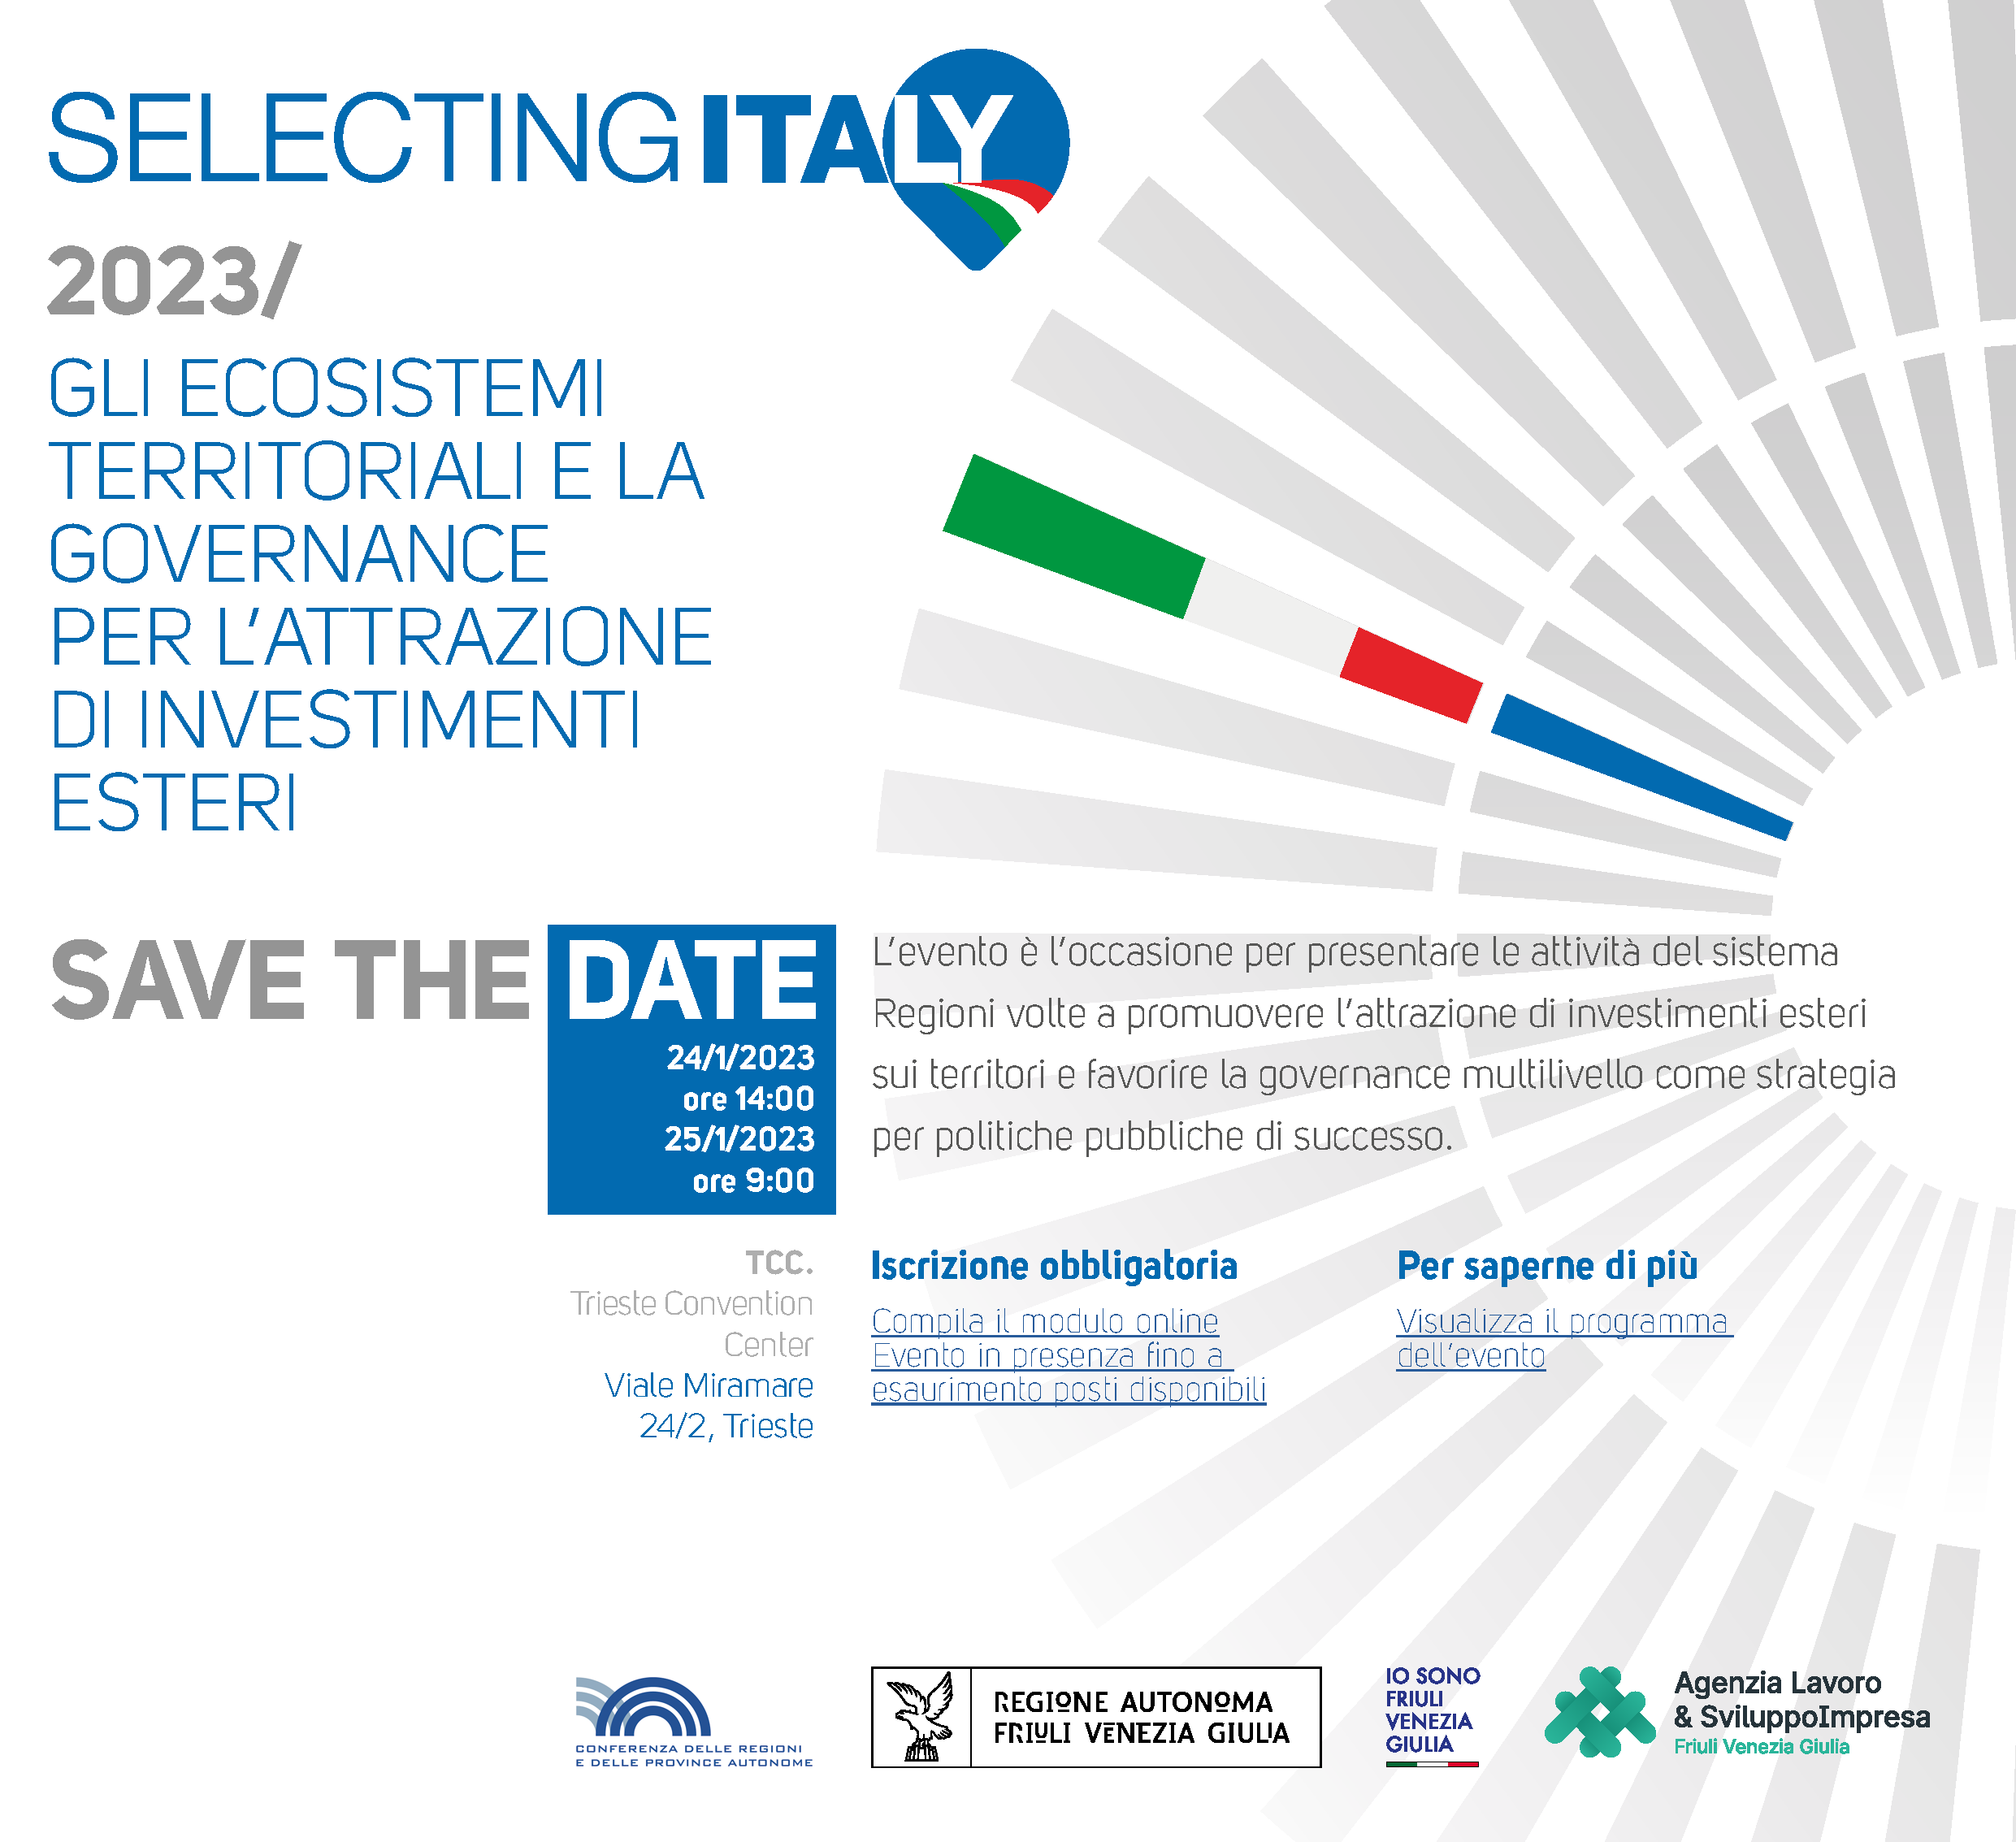 file/ELEMENTO_NEWSLETTER/25154/save_the_date_fvg.png